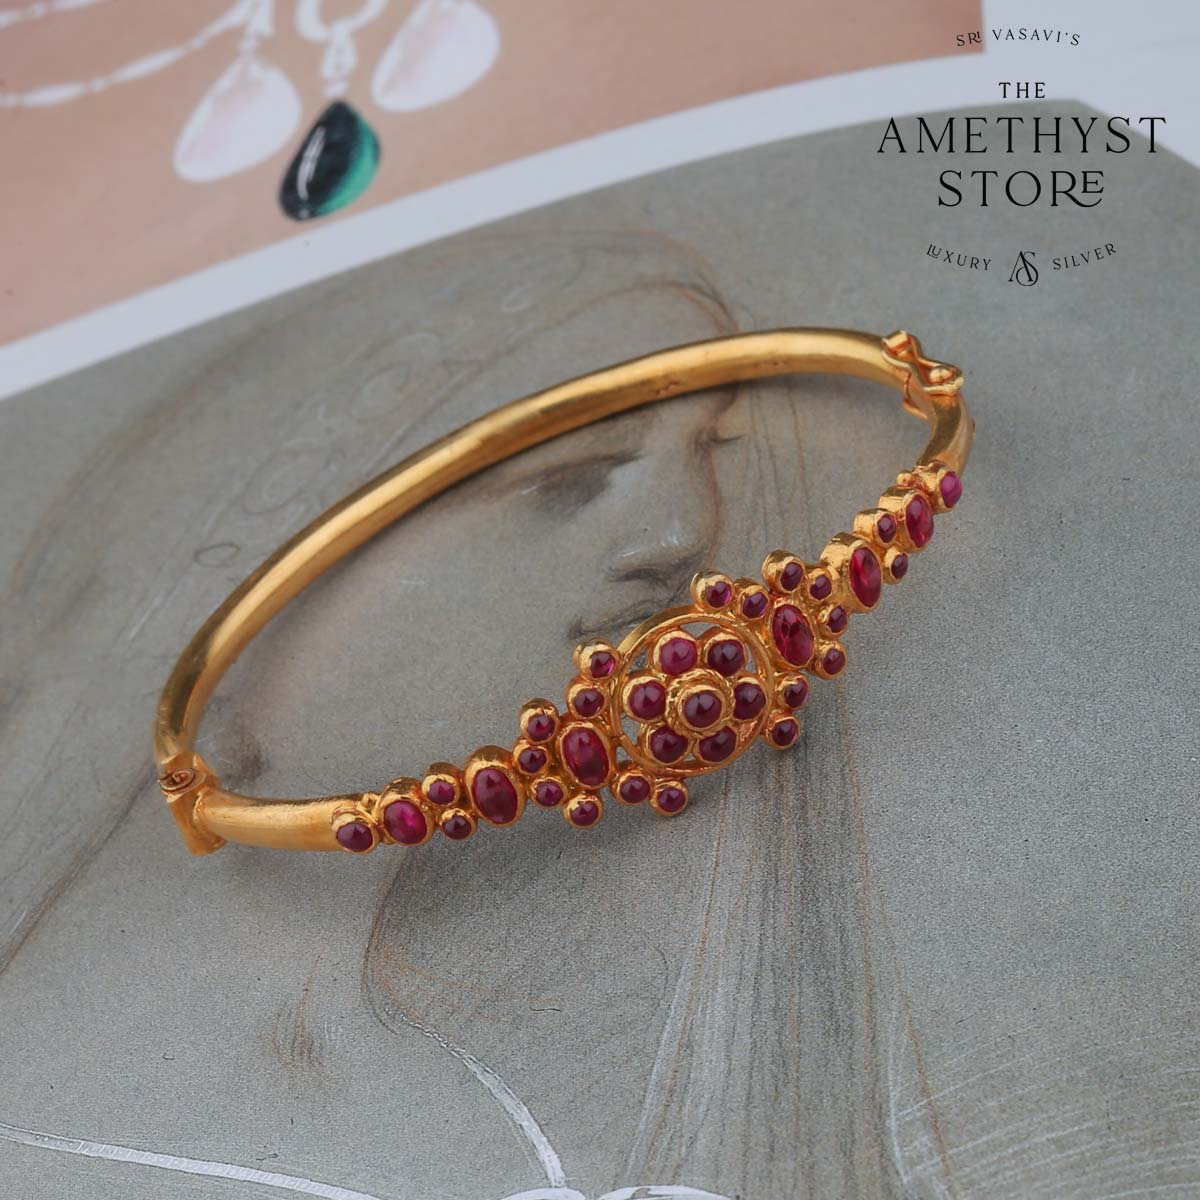 9 Beautiful Designs of Gold Bangles with Stones for Trendy Look | Bangles  jewelry designs, Gold bangles design, Gold jewellery design necklaces